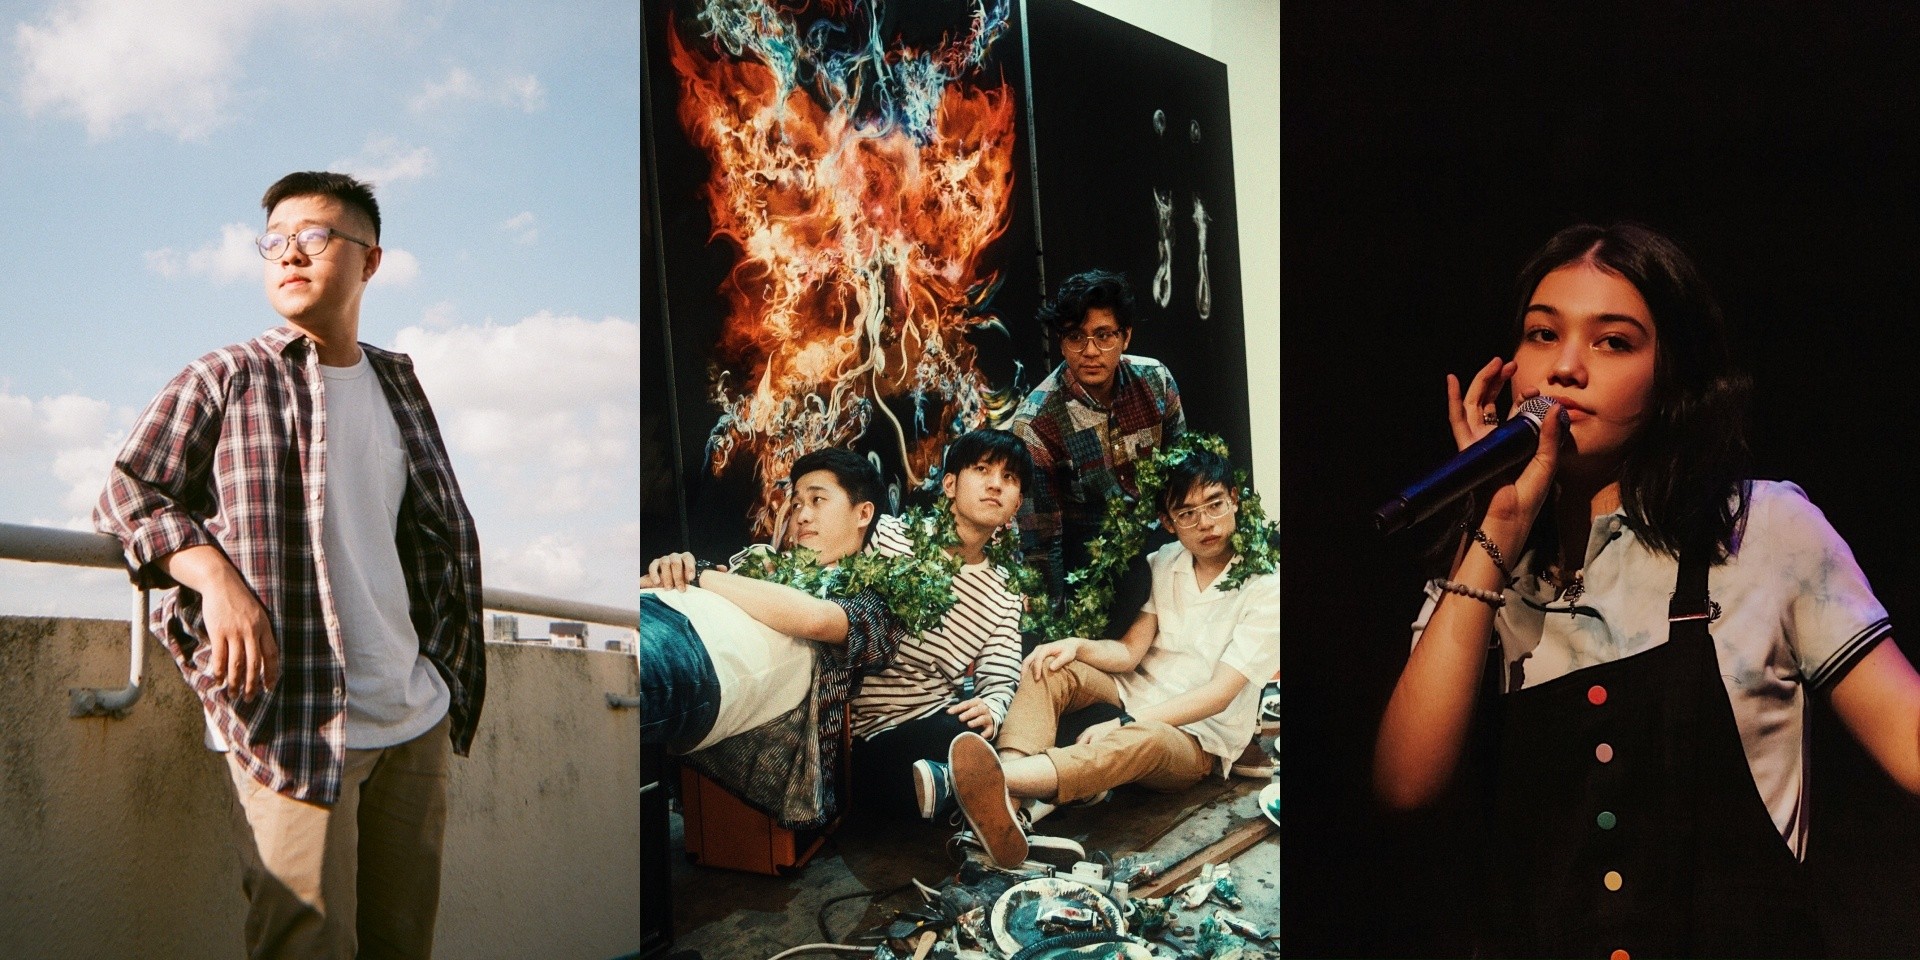 M1LDL1FE, YAØ and Shye to debut at Karaoke Livestream Concert by Bandwagon Sessions x EBX Live